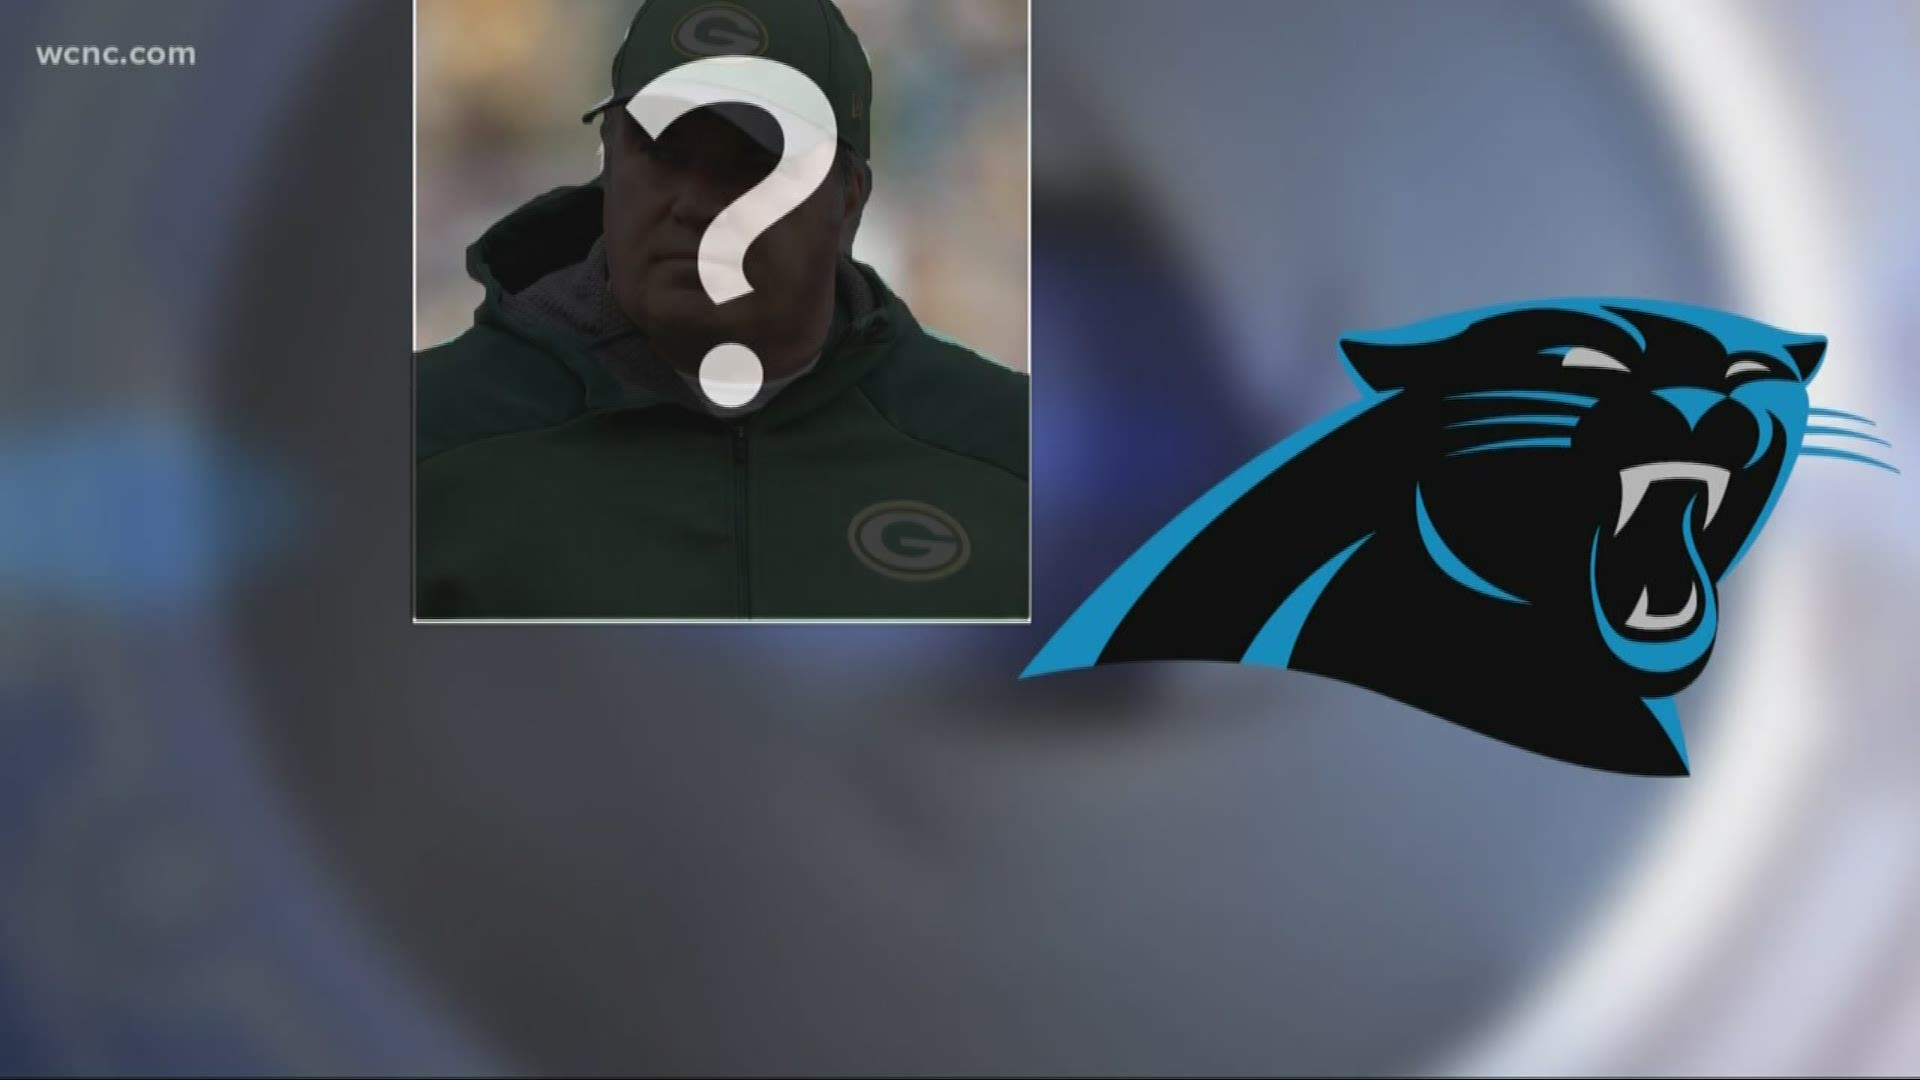 In the last 24 hours, a lot of names have come up that could be considered for the job after Ron Rivera's firing.